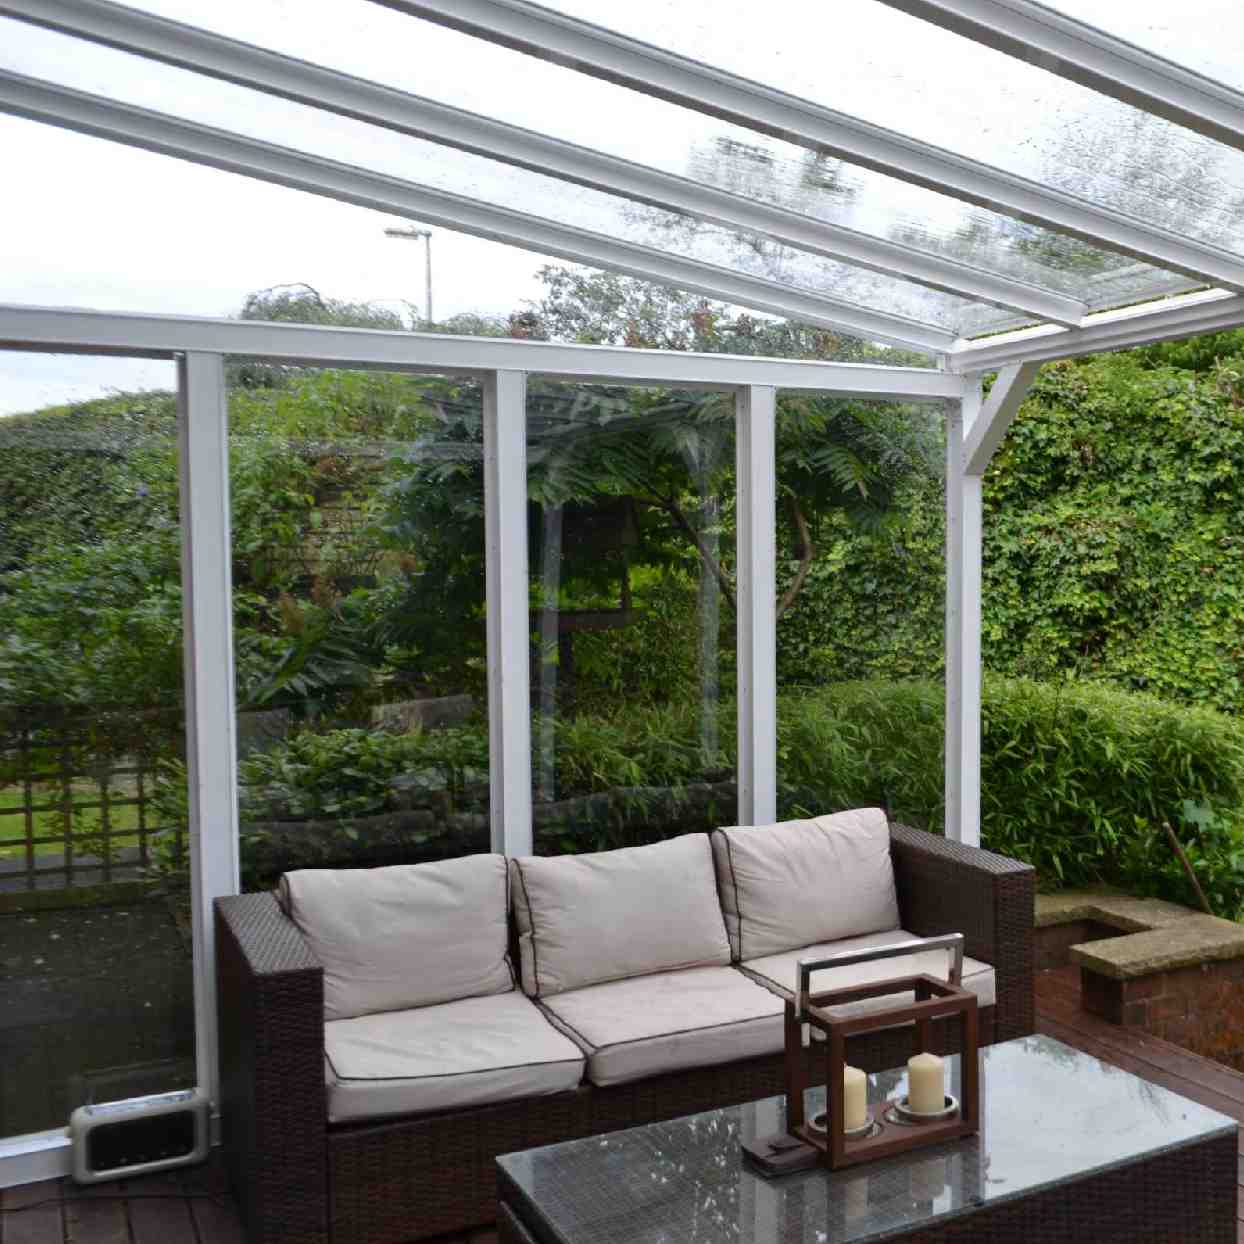 Buy Omega Verandah White with 6mm Glass Clear Plate Polycarbonate Glazing - 2.8m (W) x 3.0m (P), (2) Supporting Posts online today